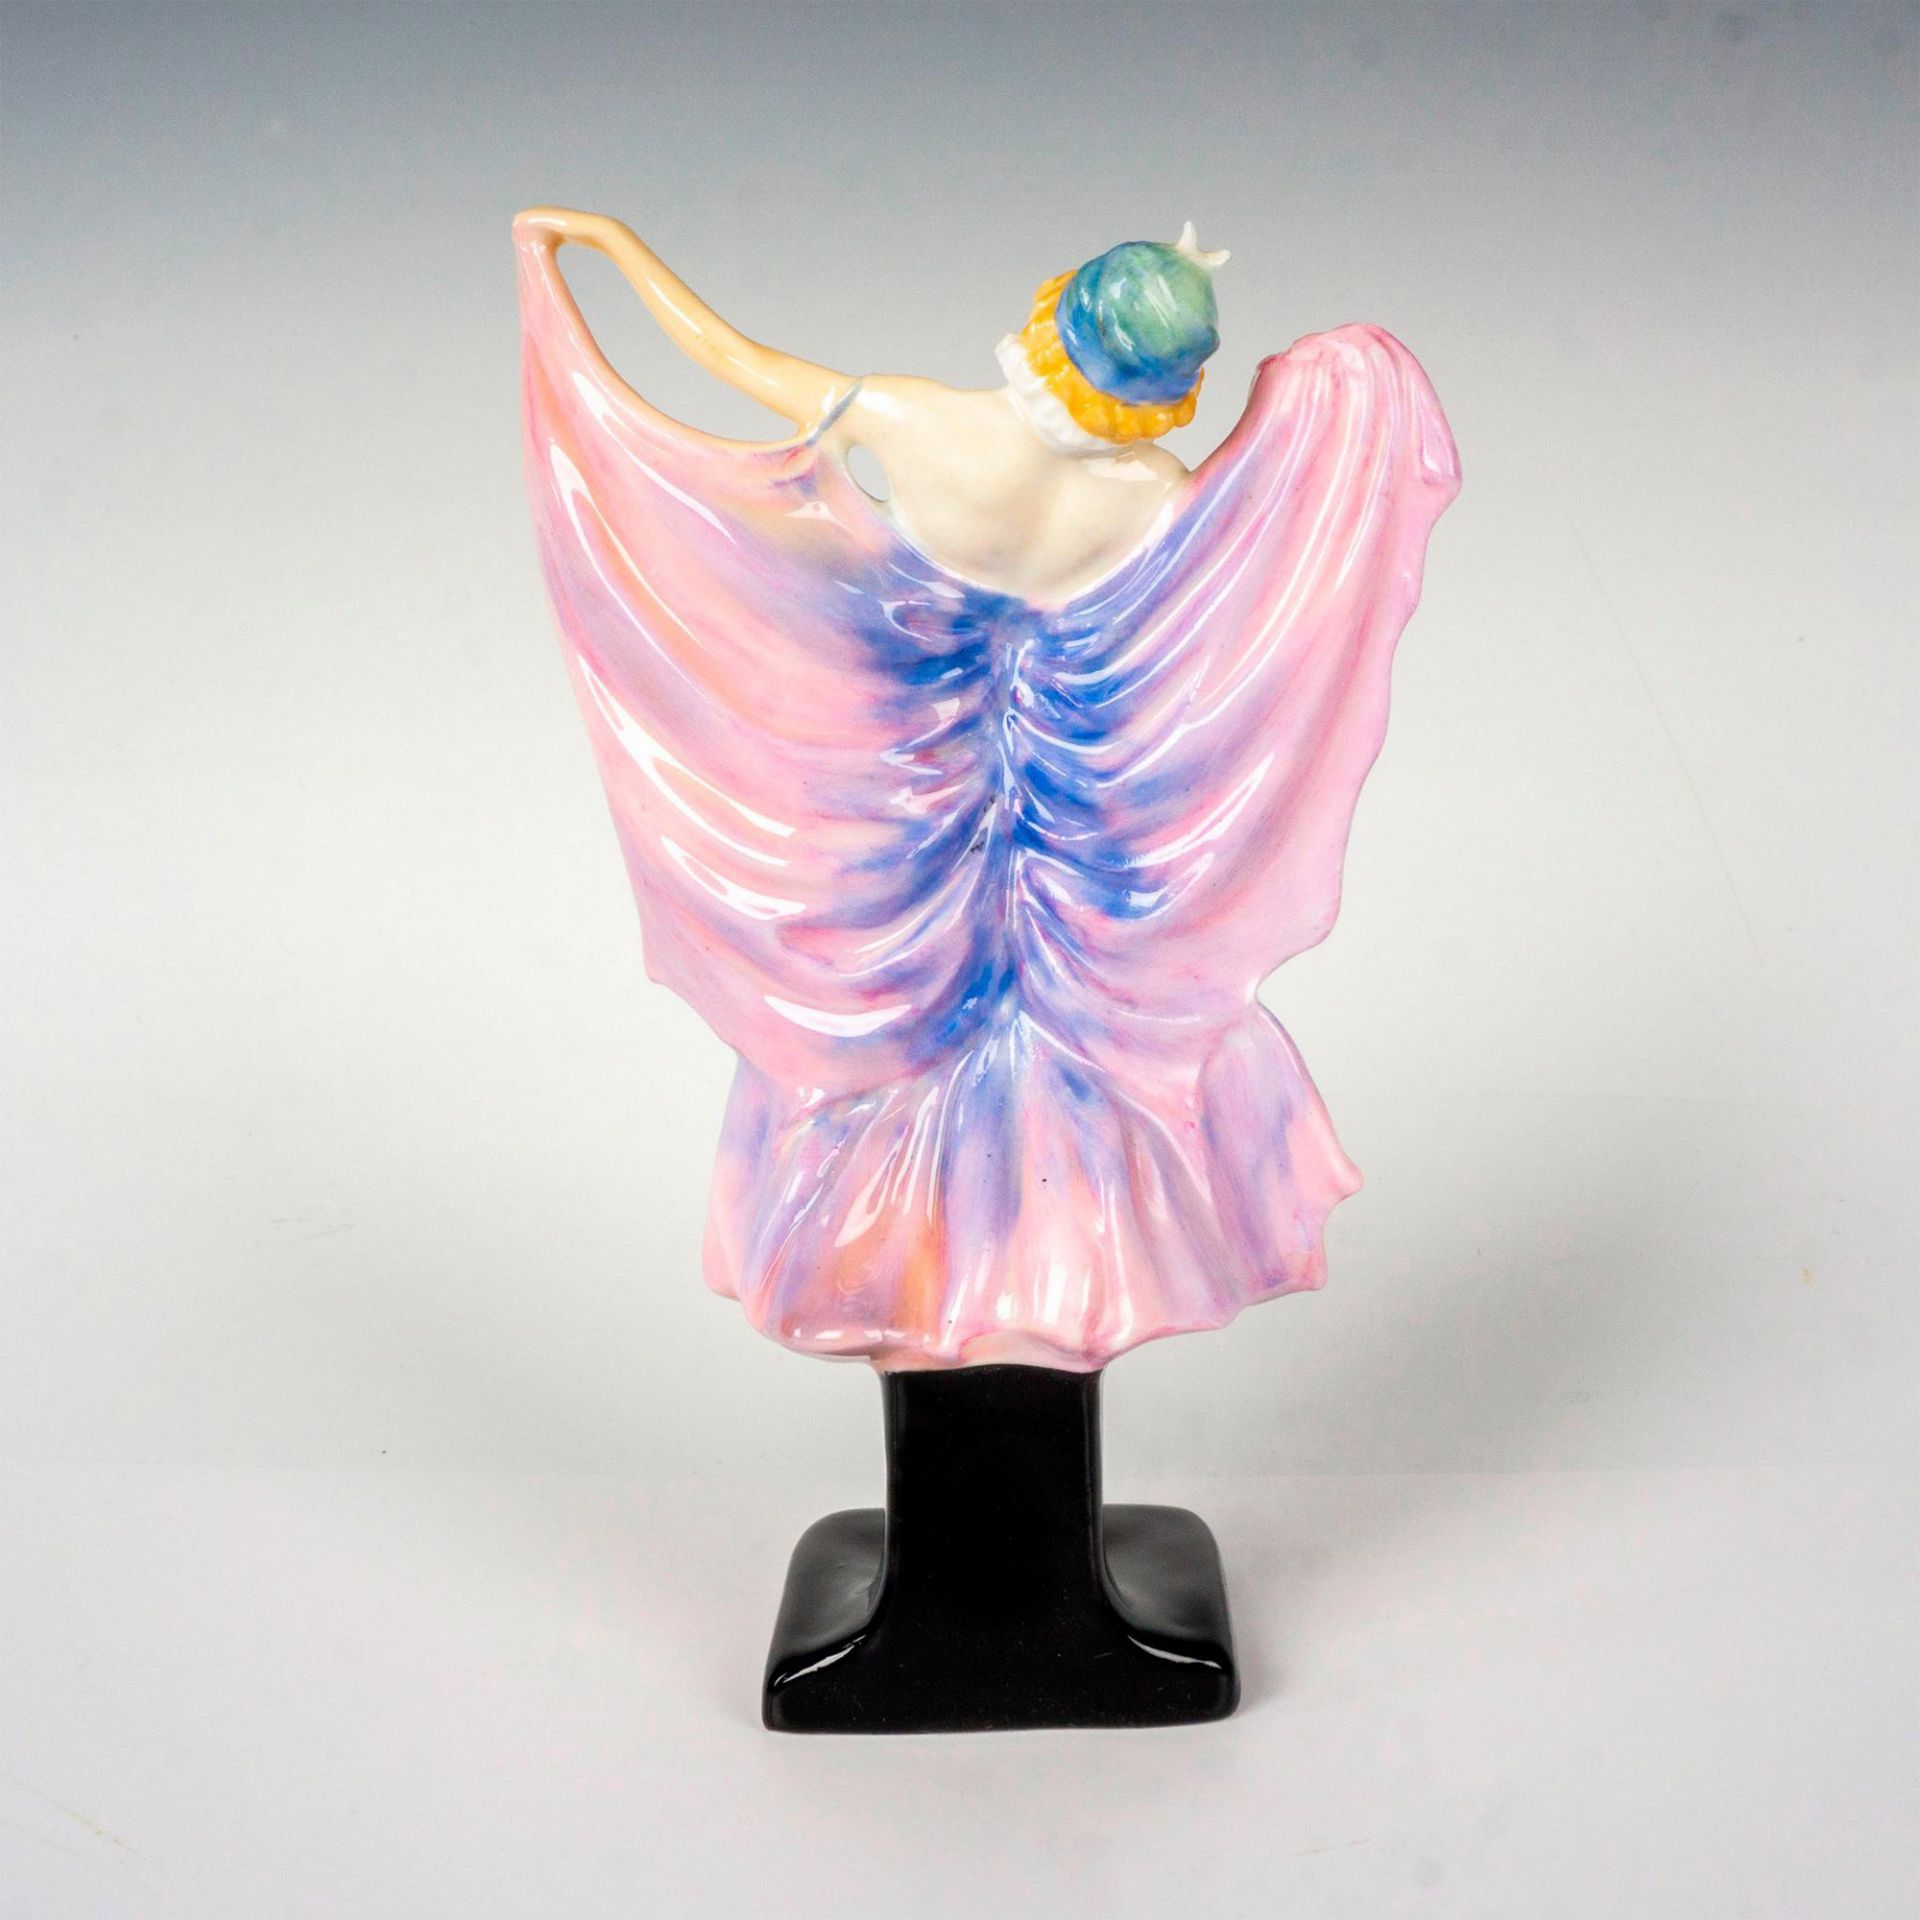 Butterfly Woman HN1456 - Royal Doulton Figurine - Image 2 of 3